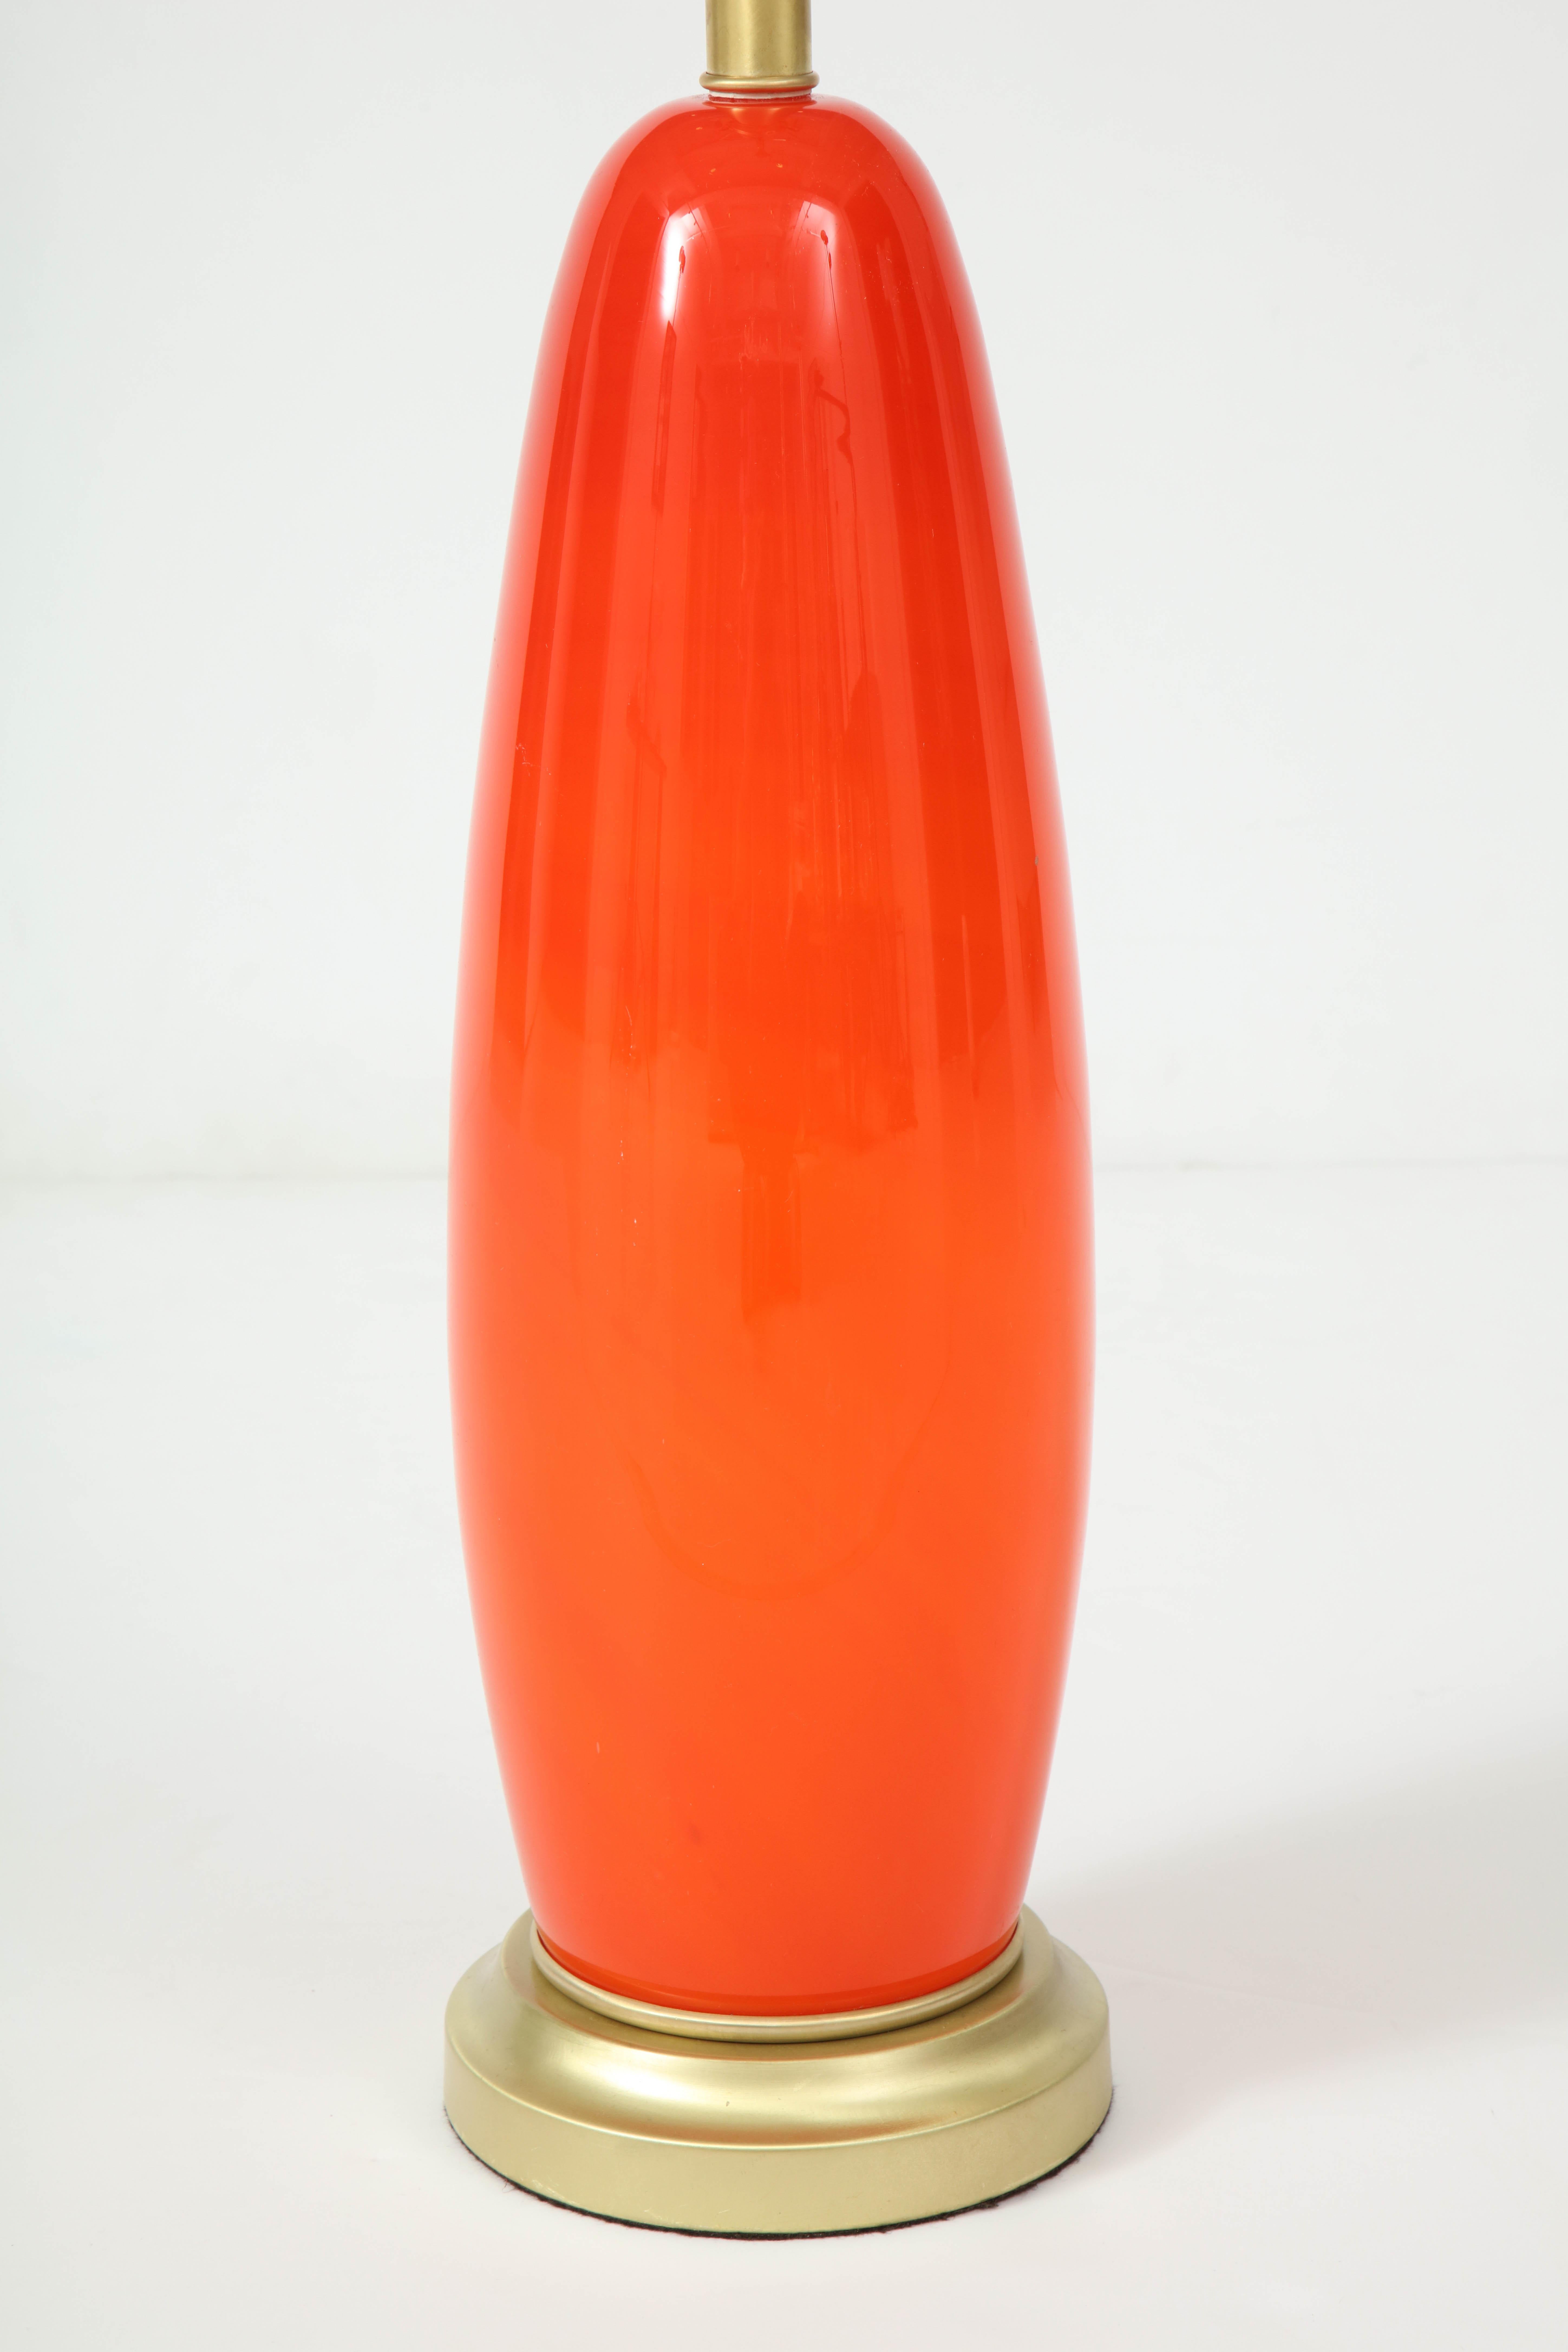 Torpedo shaped Murano glass lamp in a vibrant Tangerine color, with a satin brass base and socket. Rewired for use in the USA.